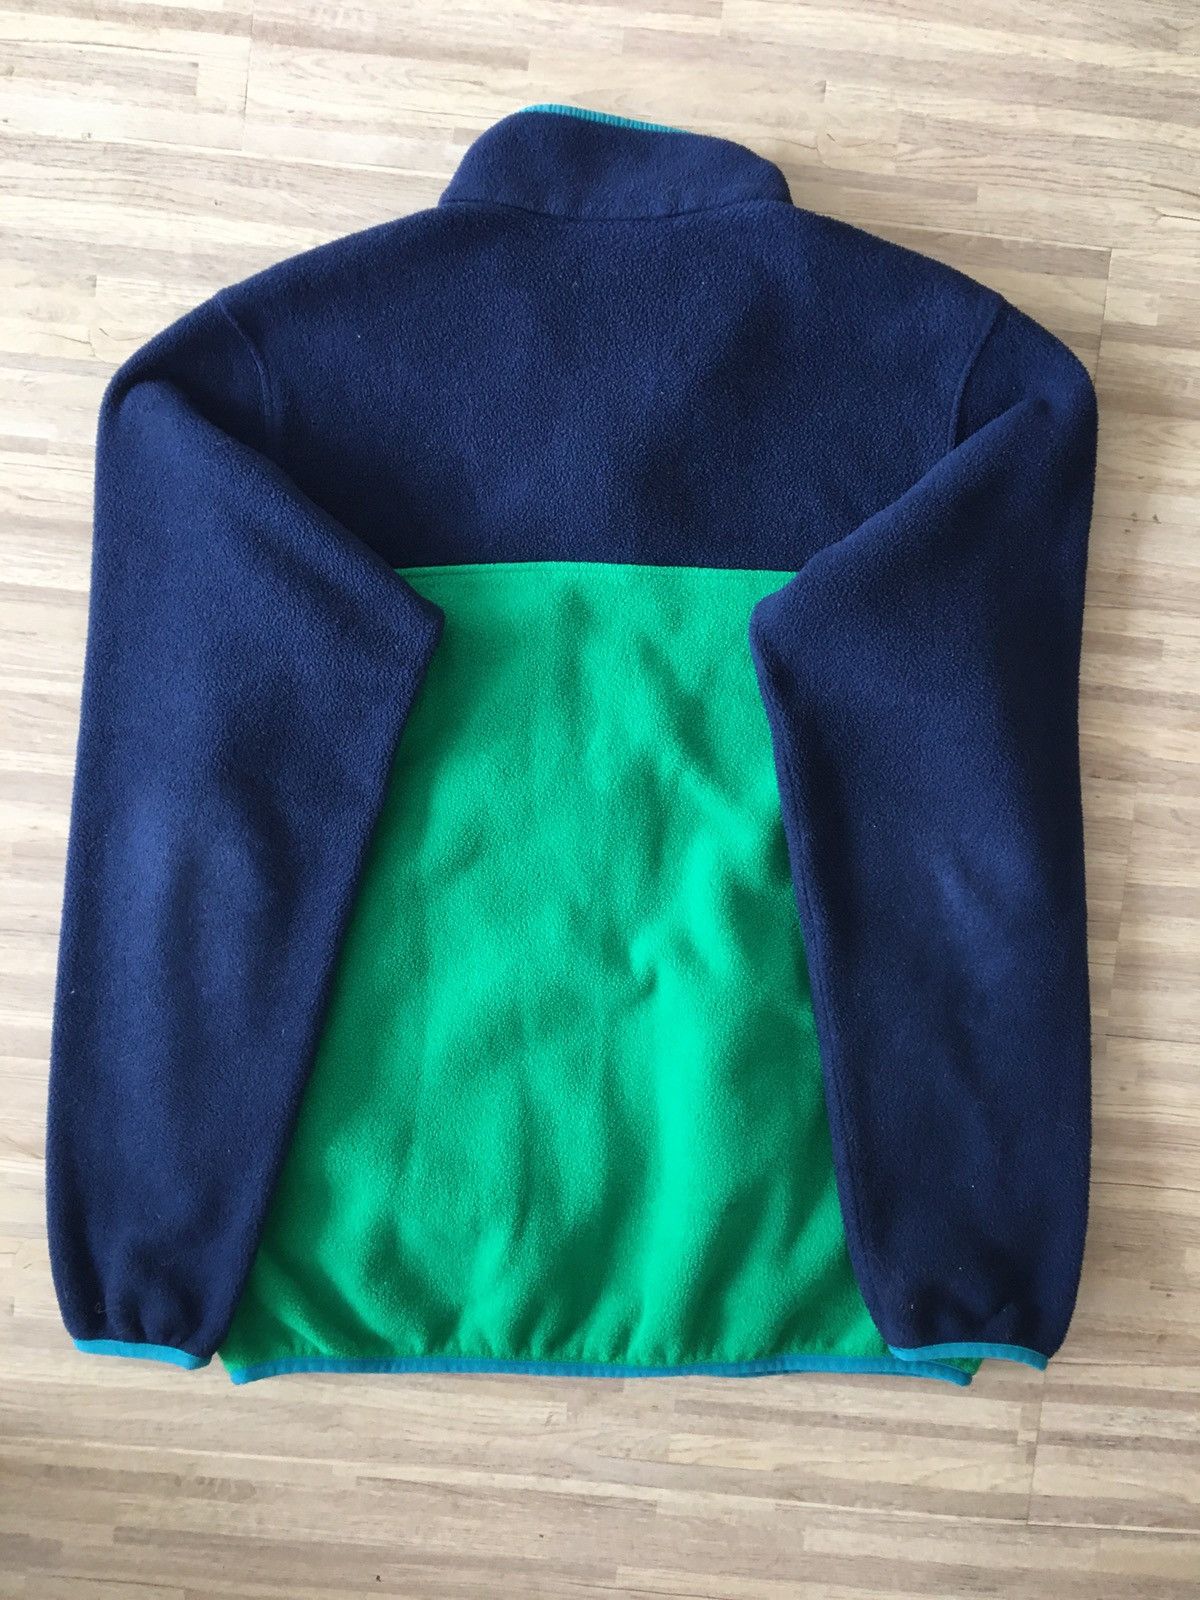 Vintage Patagonia 90’s Synchilla Snap-T Zip Fleece Pullover Size US M / EU 48-50 / 2 - 3 Preview